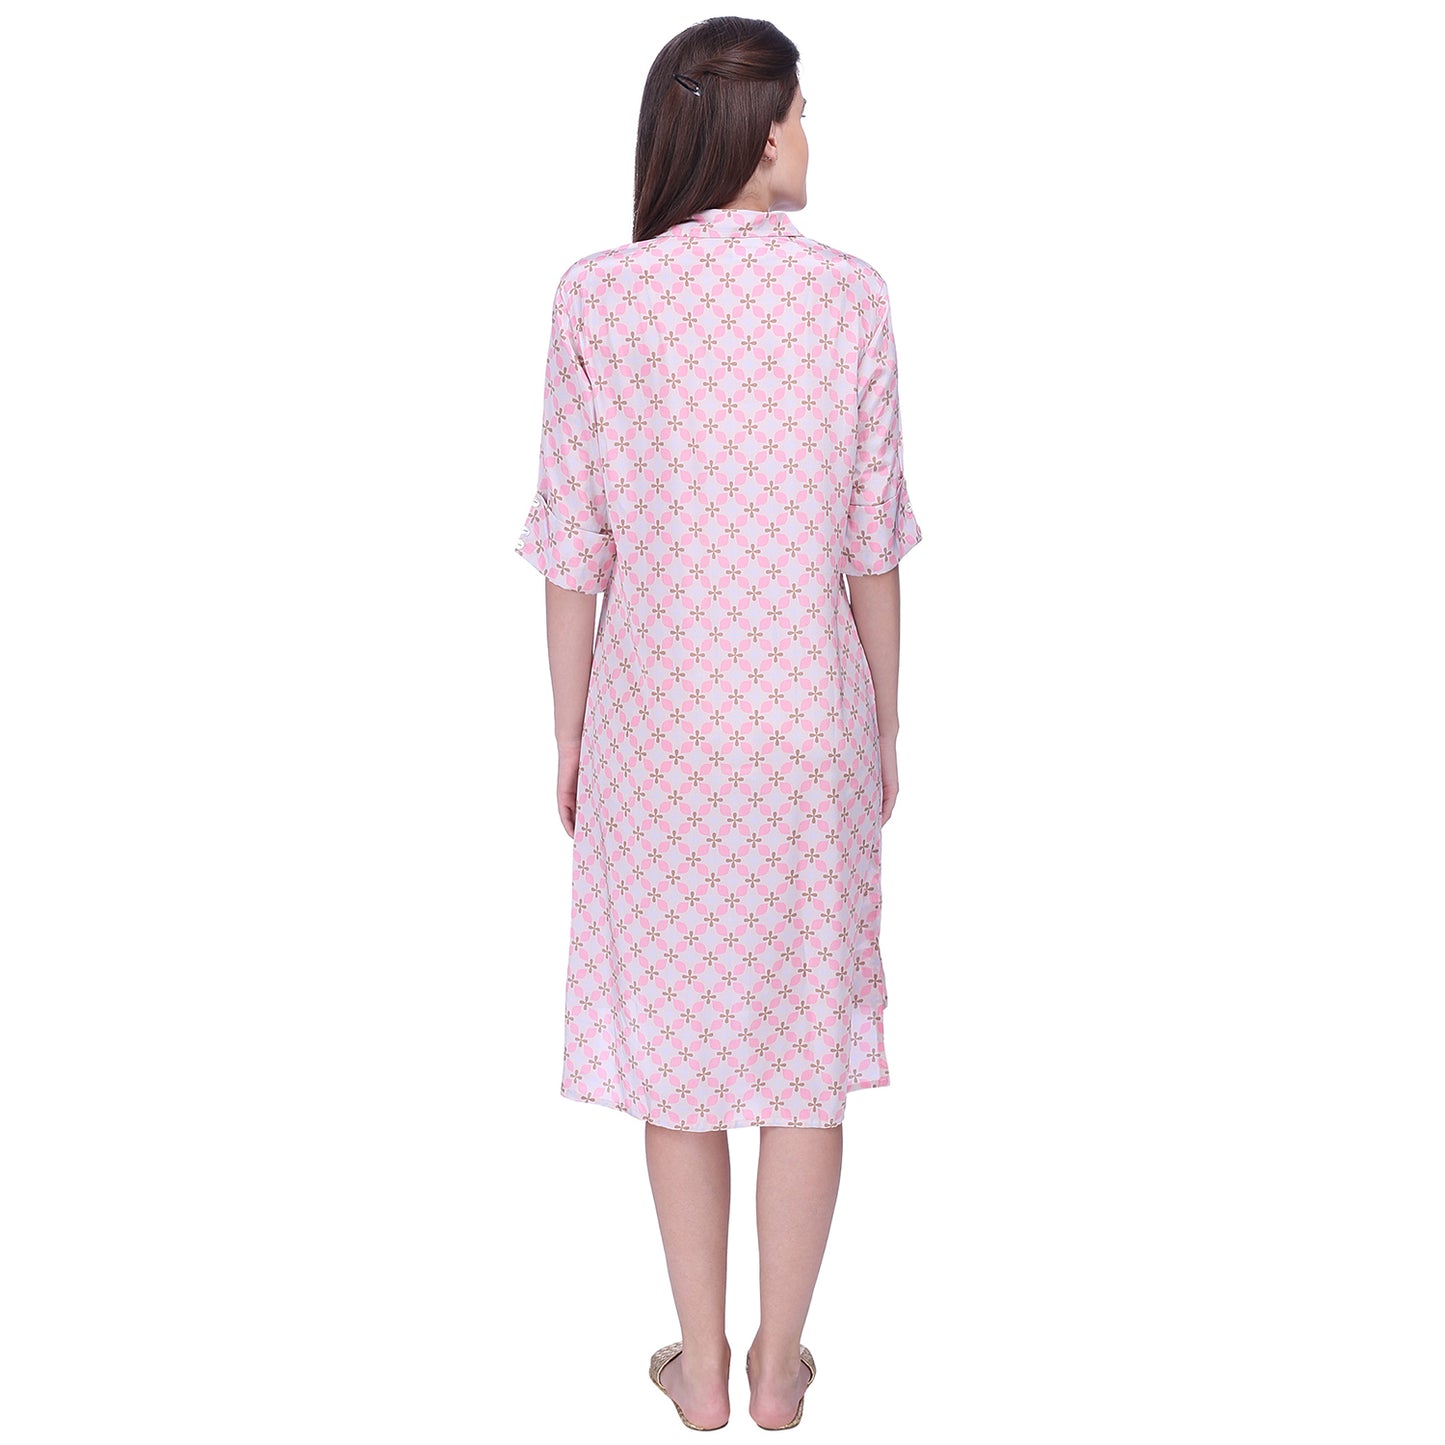 Geometric print brown and pink crepe shirt dress with roll up sleeves and long short hem